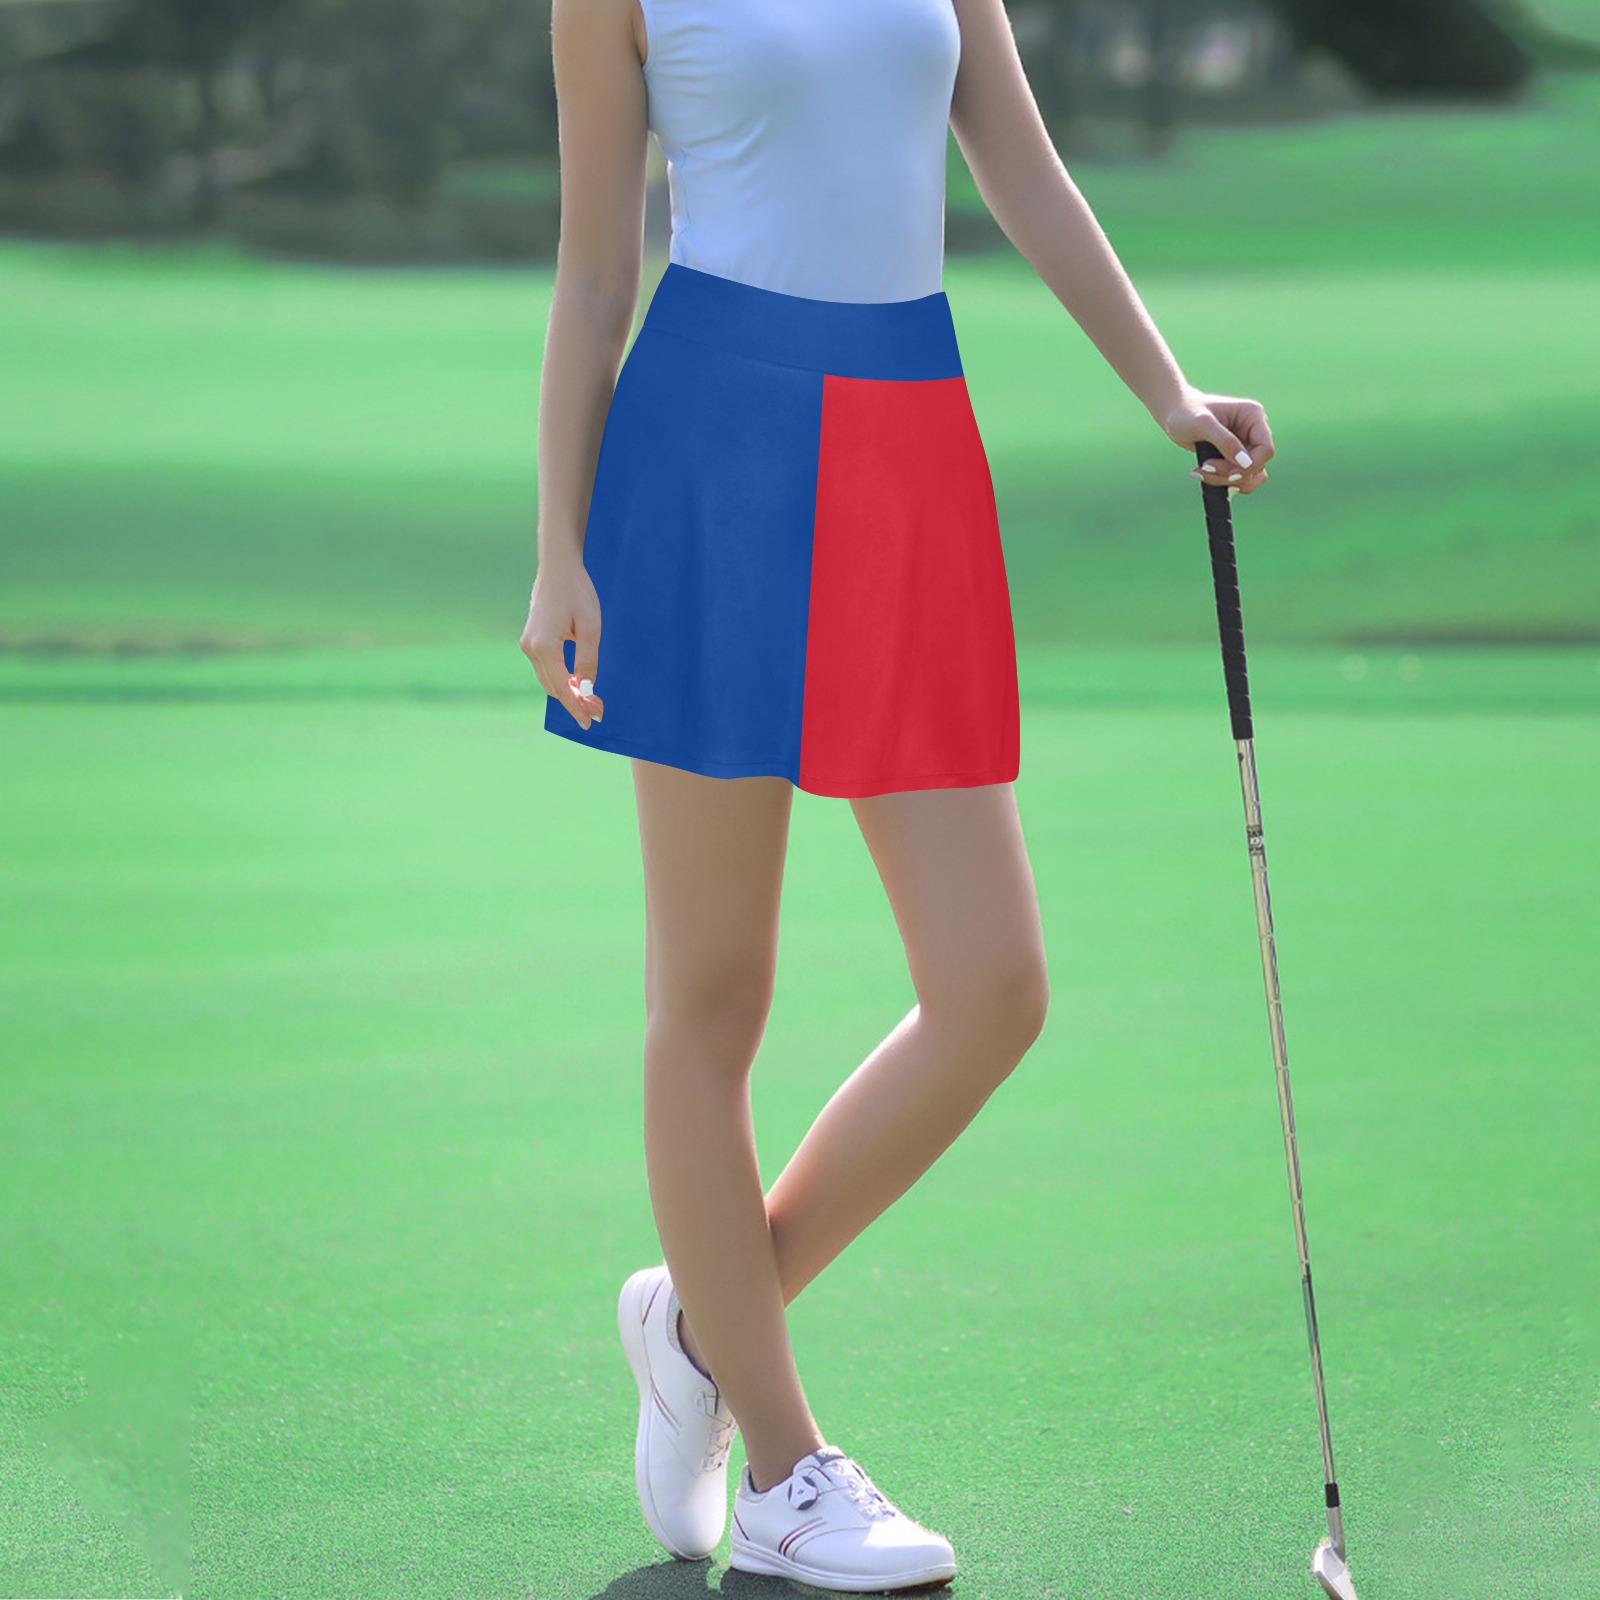 Blue and Red Women's Athletic Skirt (Model D64)